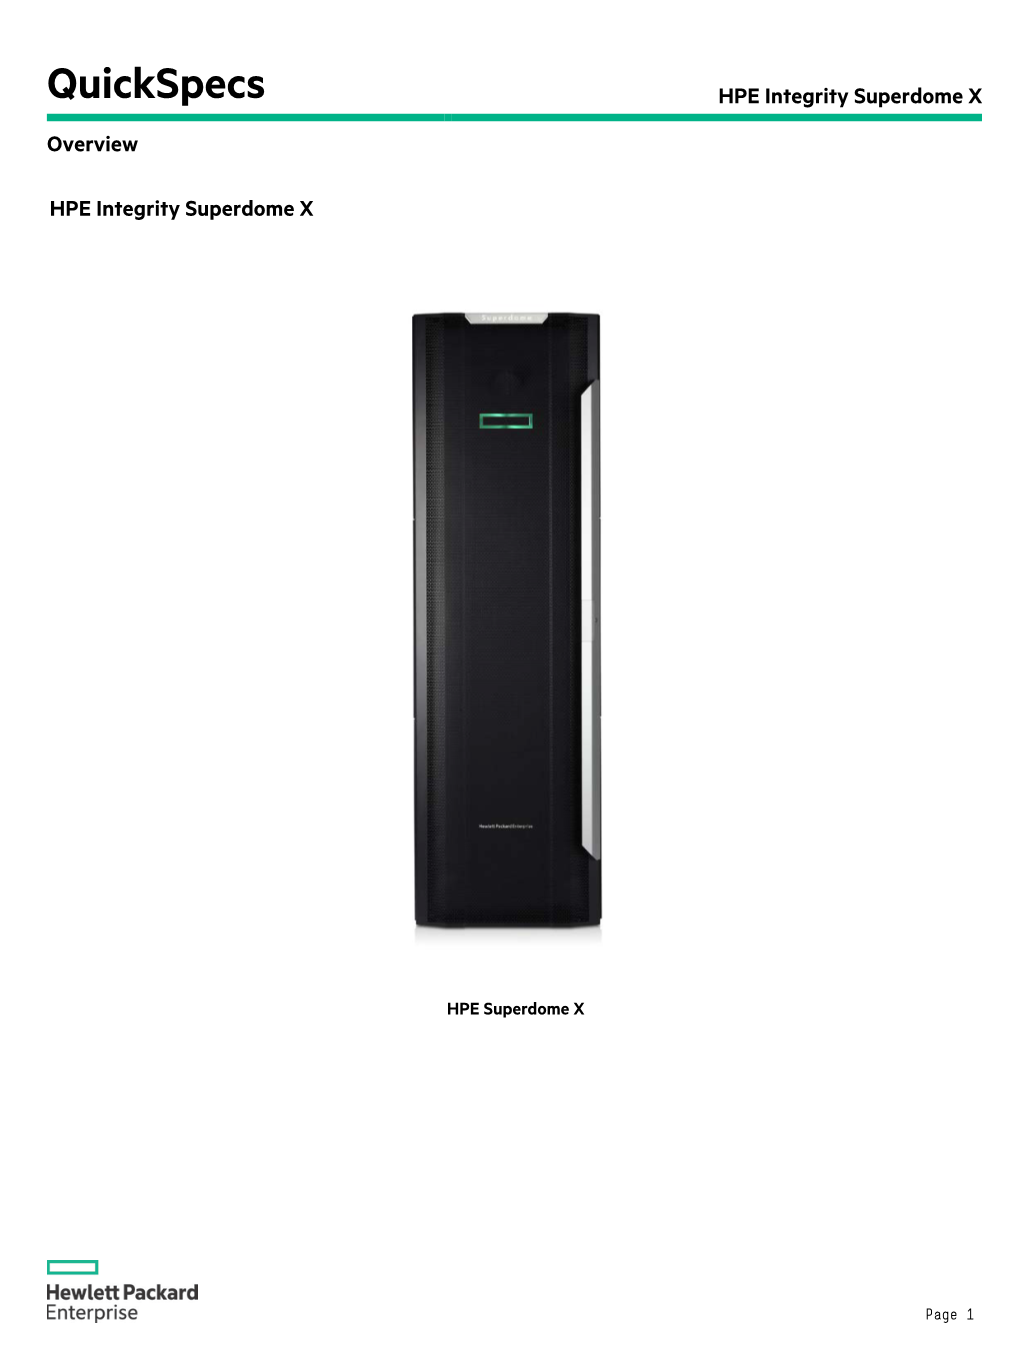 HPE Integrity Superdome X Overview